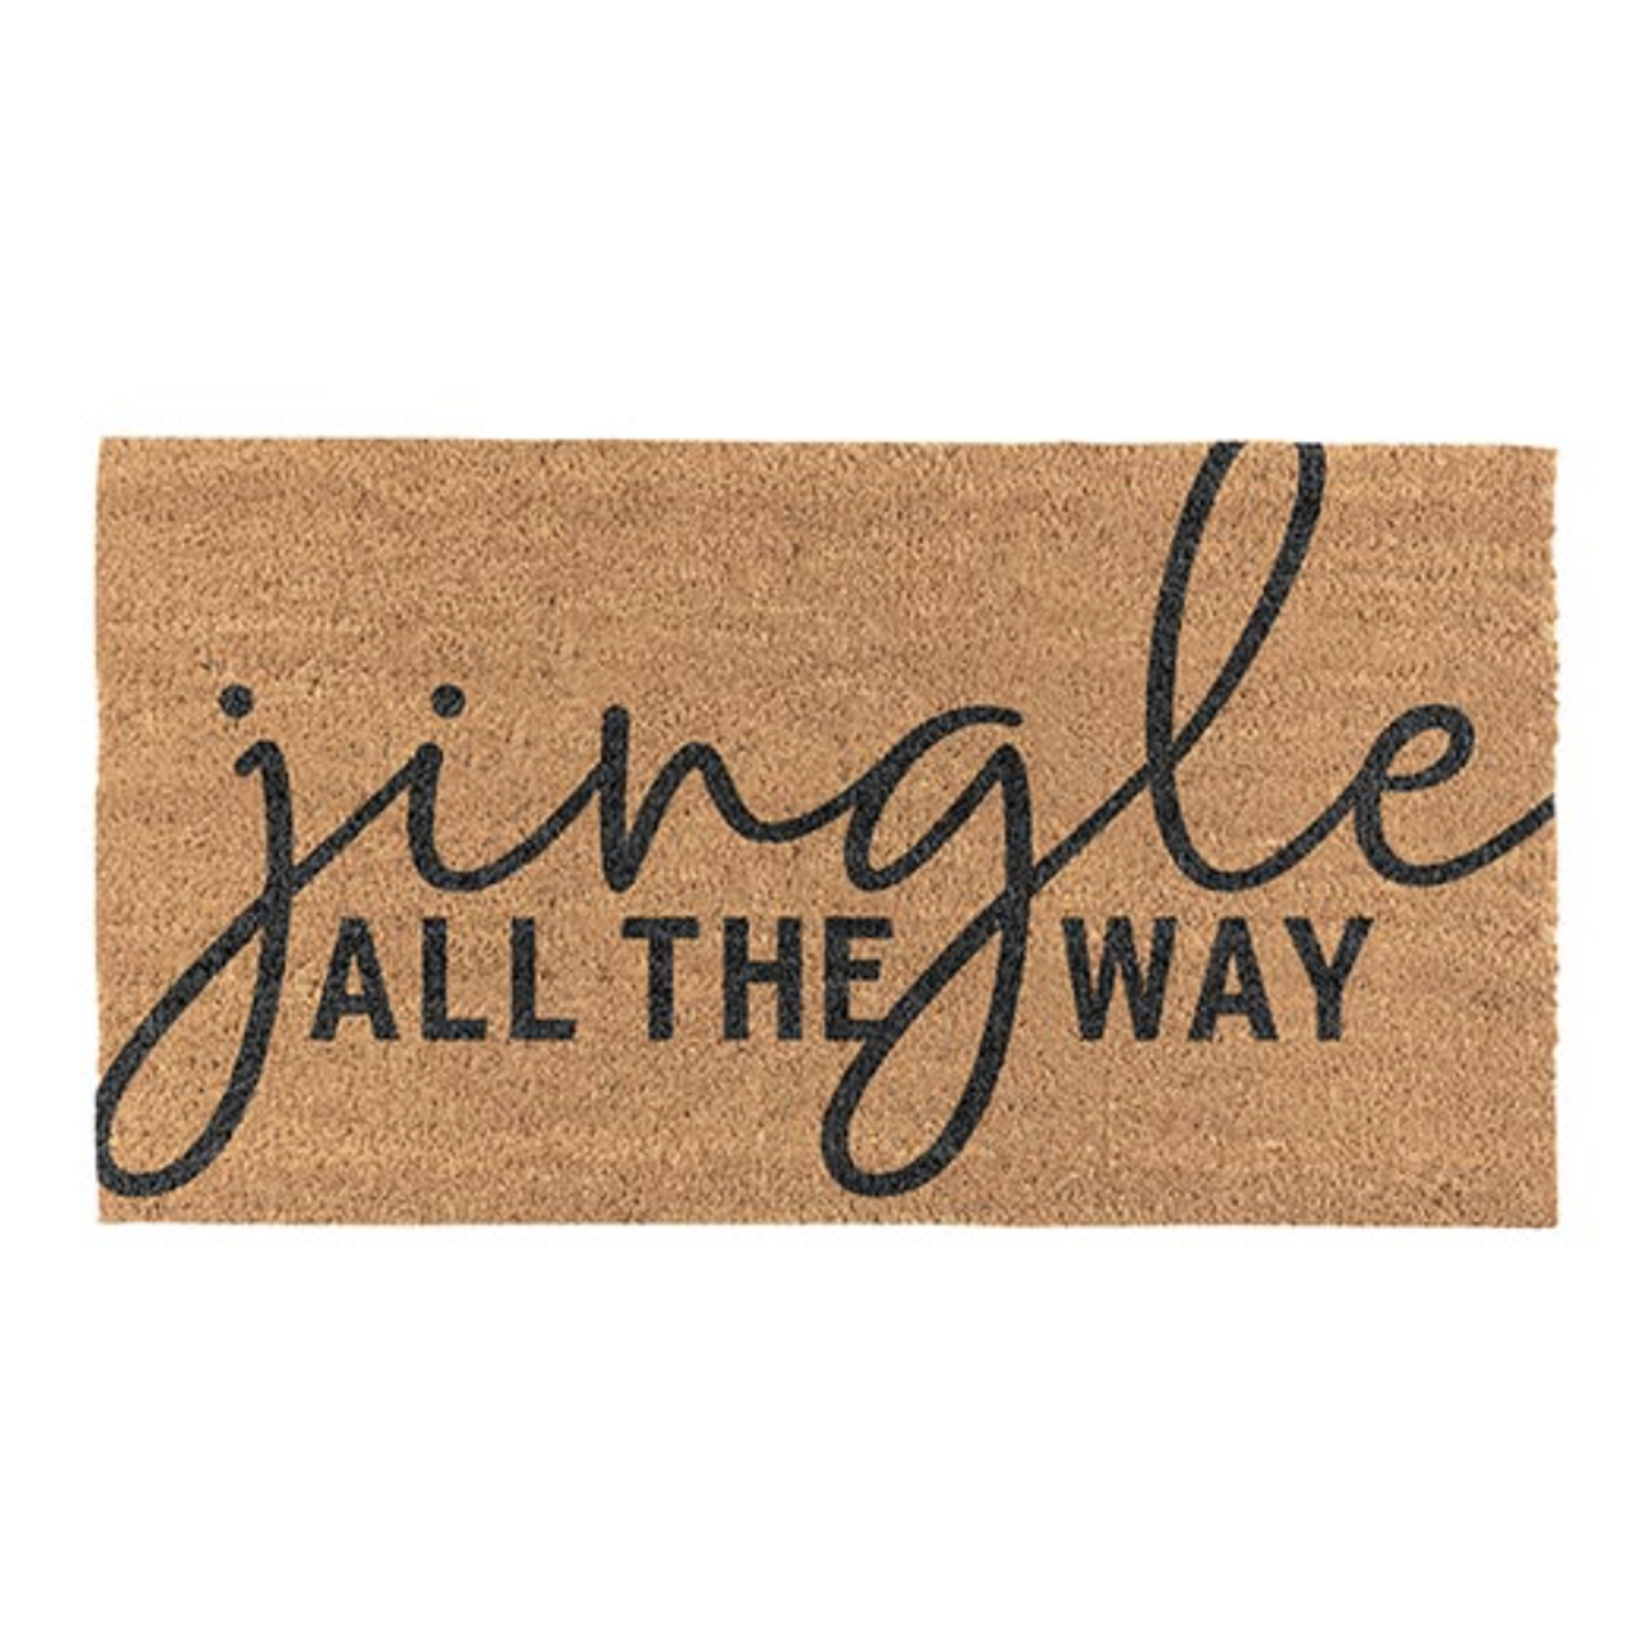 Outside The Box 30x16 Jingle All The Way Doormat